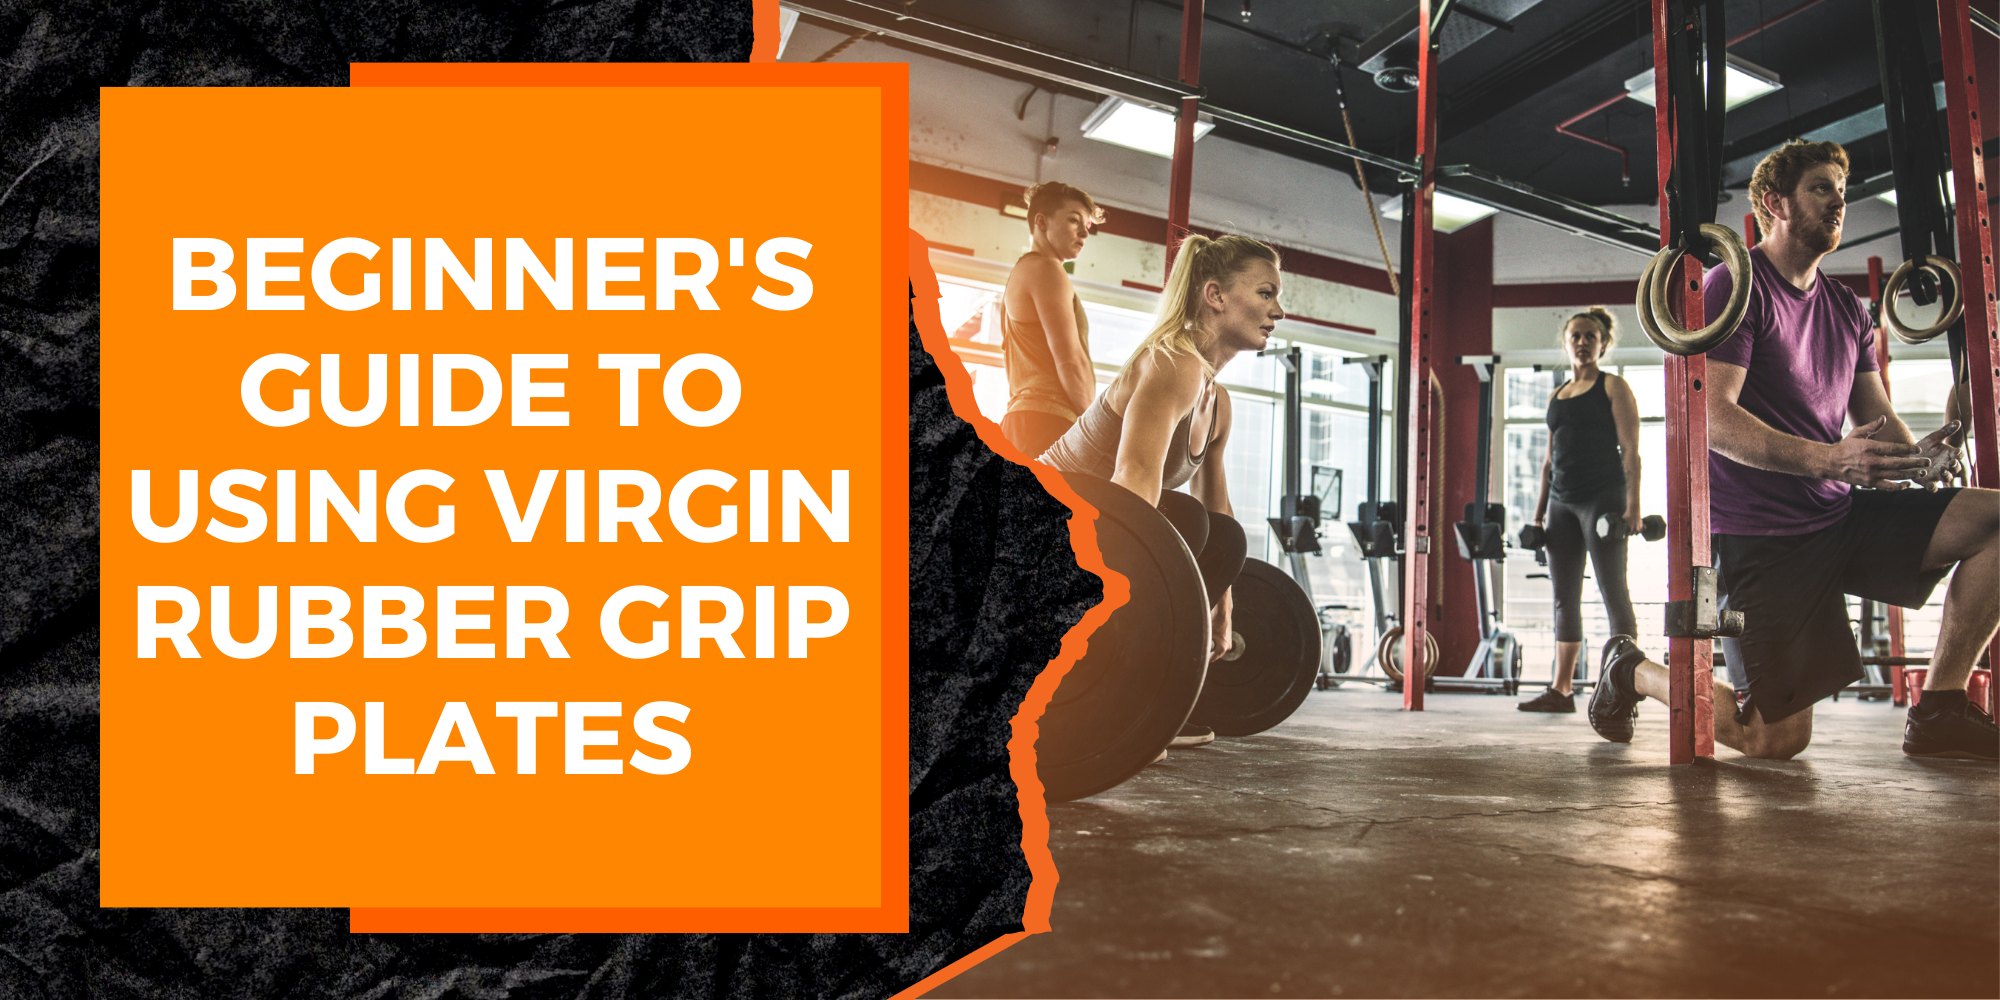 A Beginner's Guide to Using Virgin Rubber Grip Plates